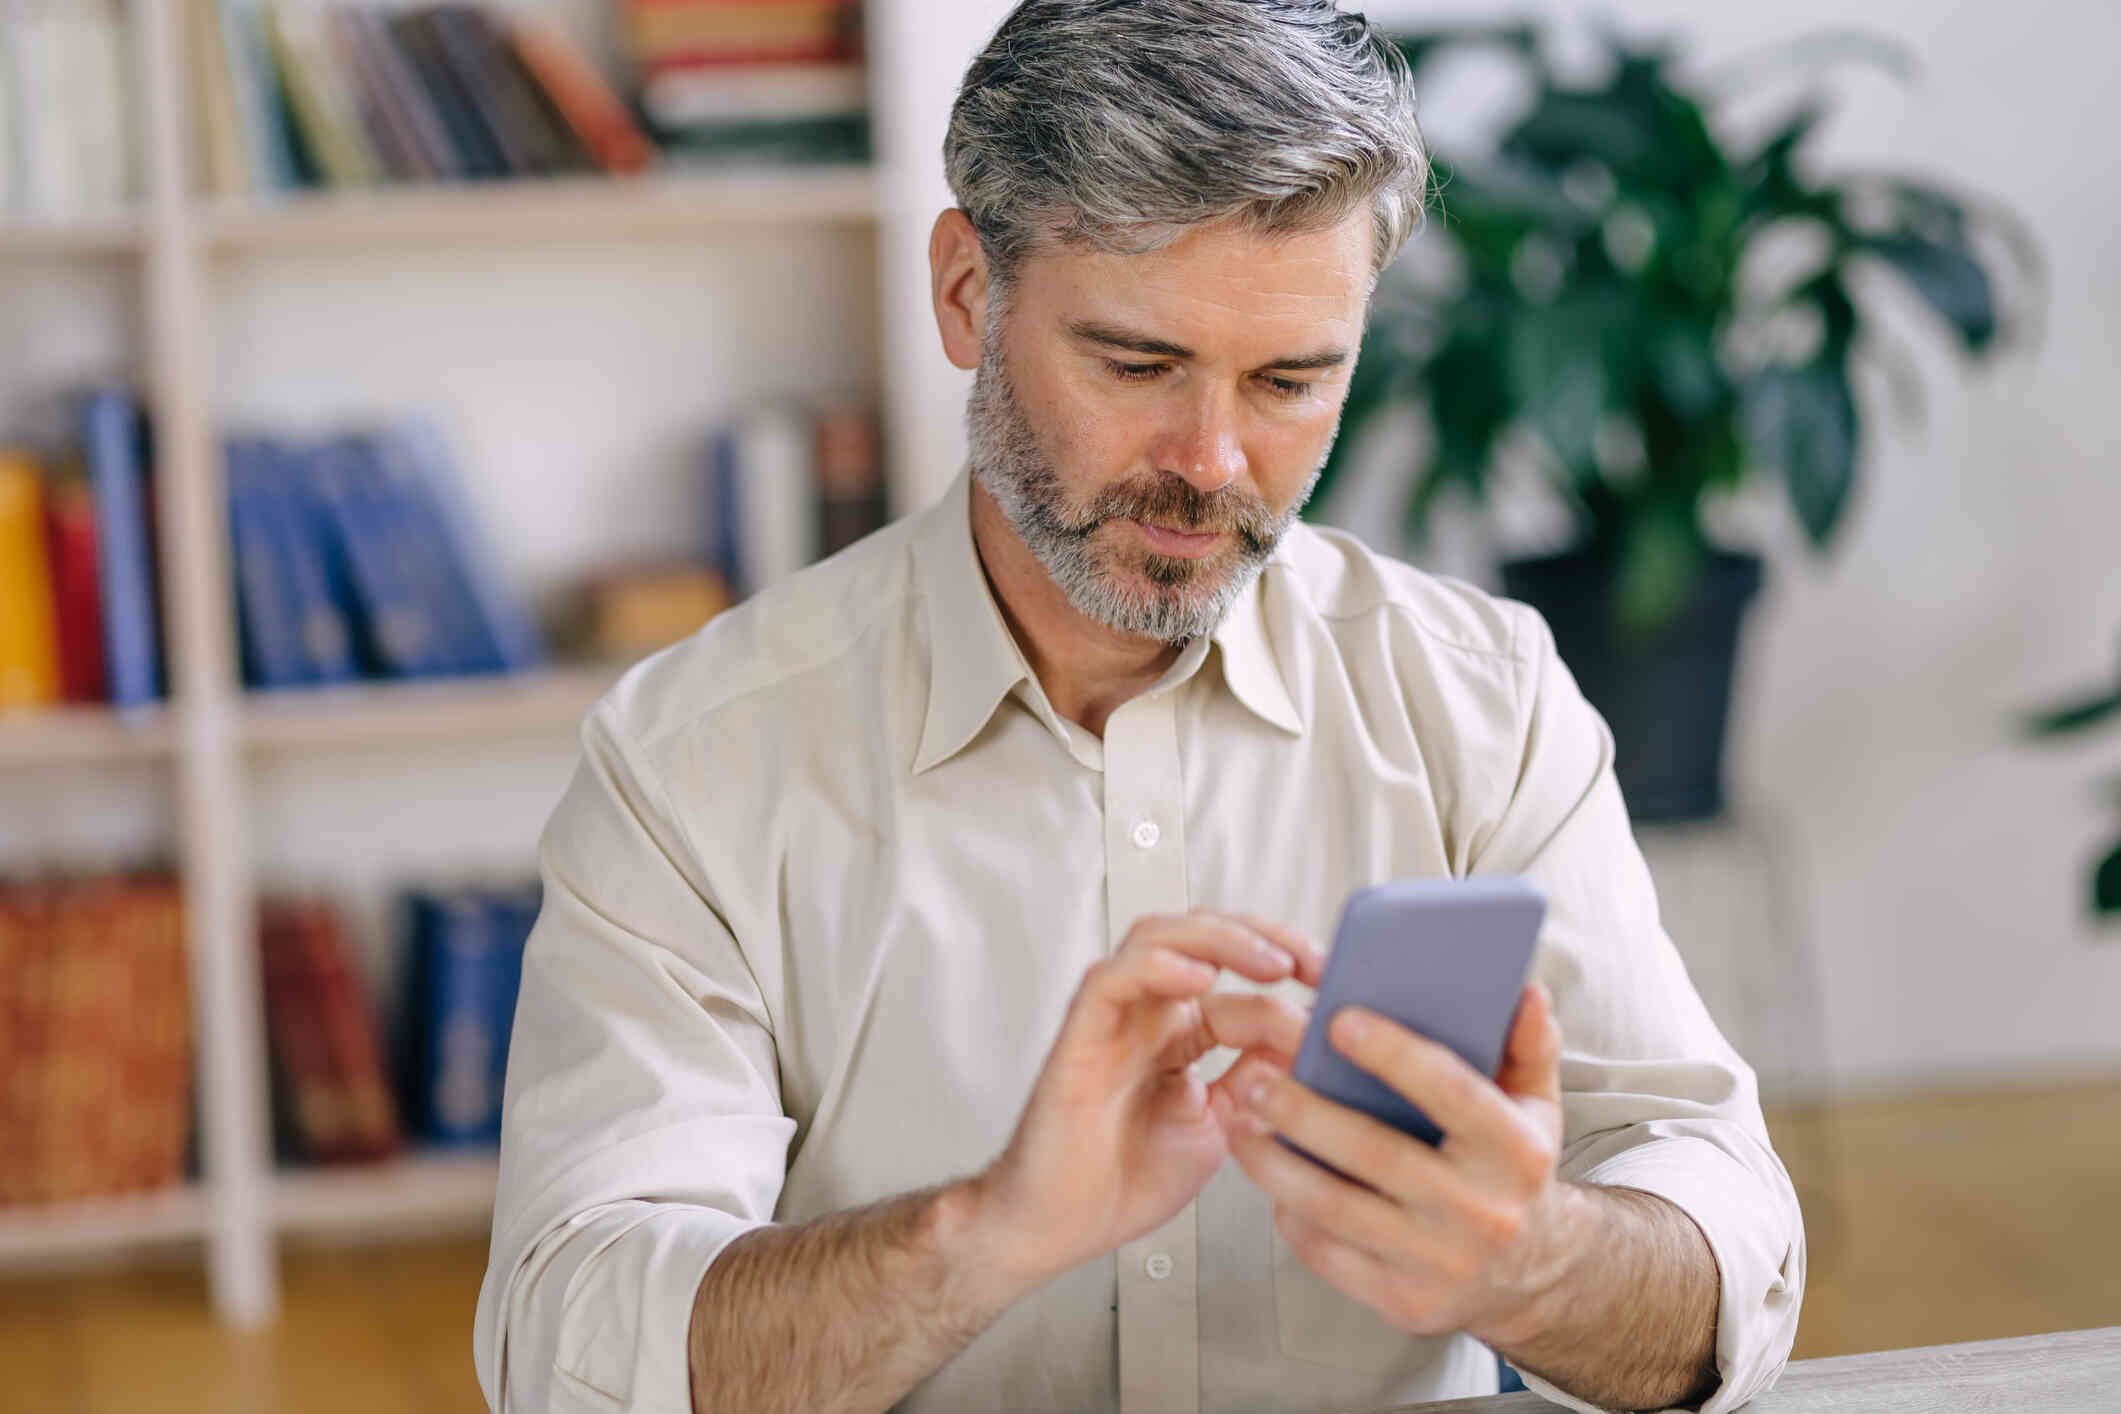 A middle aged man in a button down shirt sits head a bookcase and looks down at the cellphone in his hand.